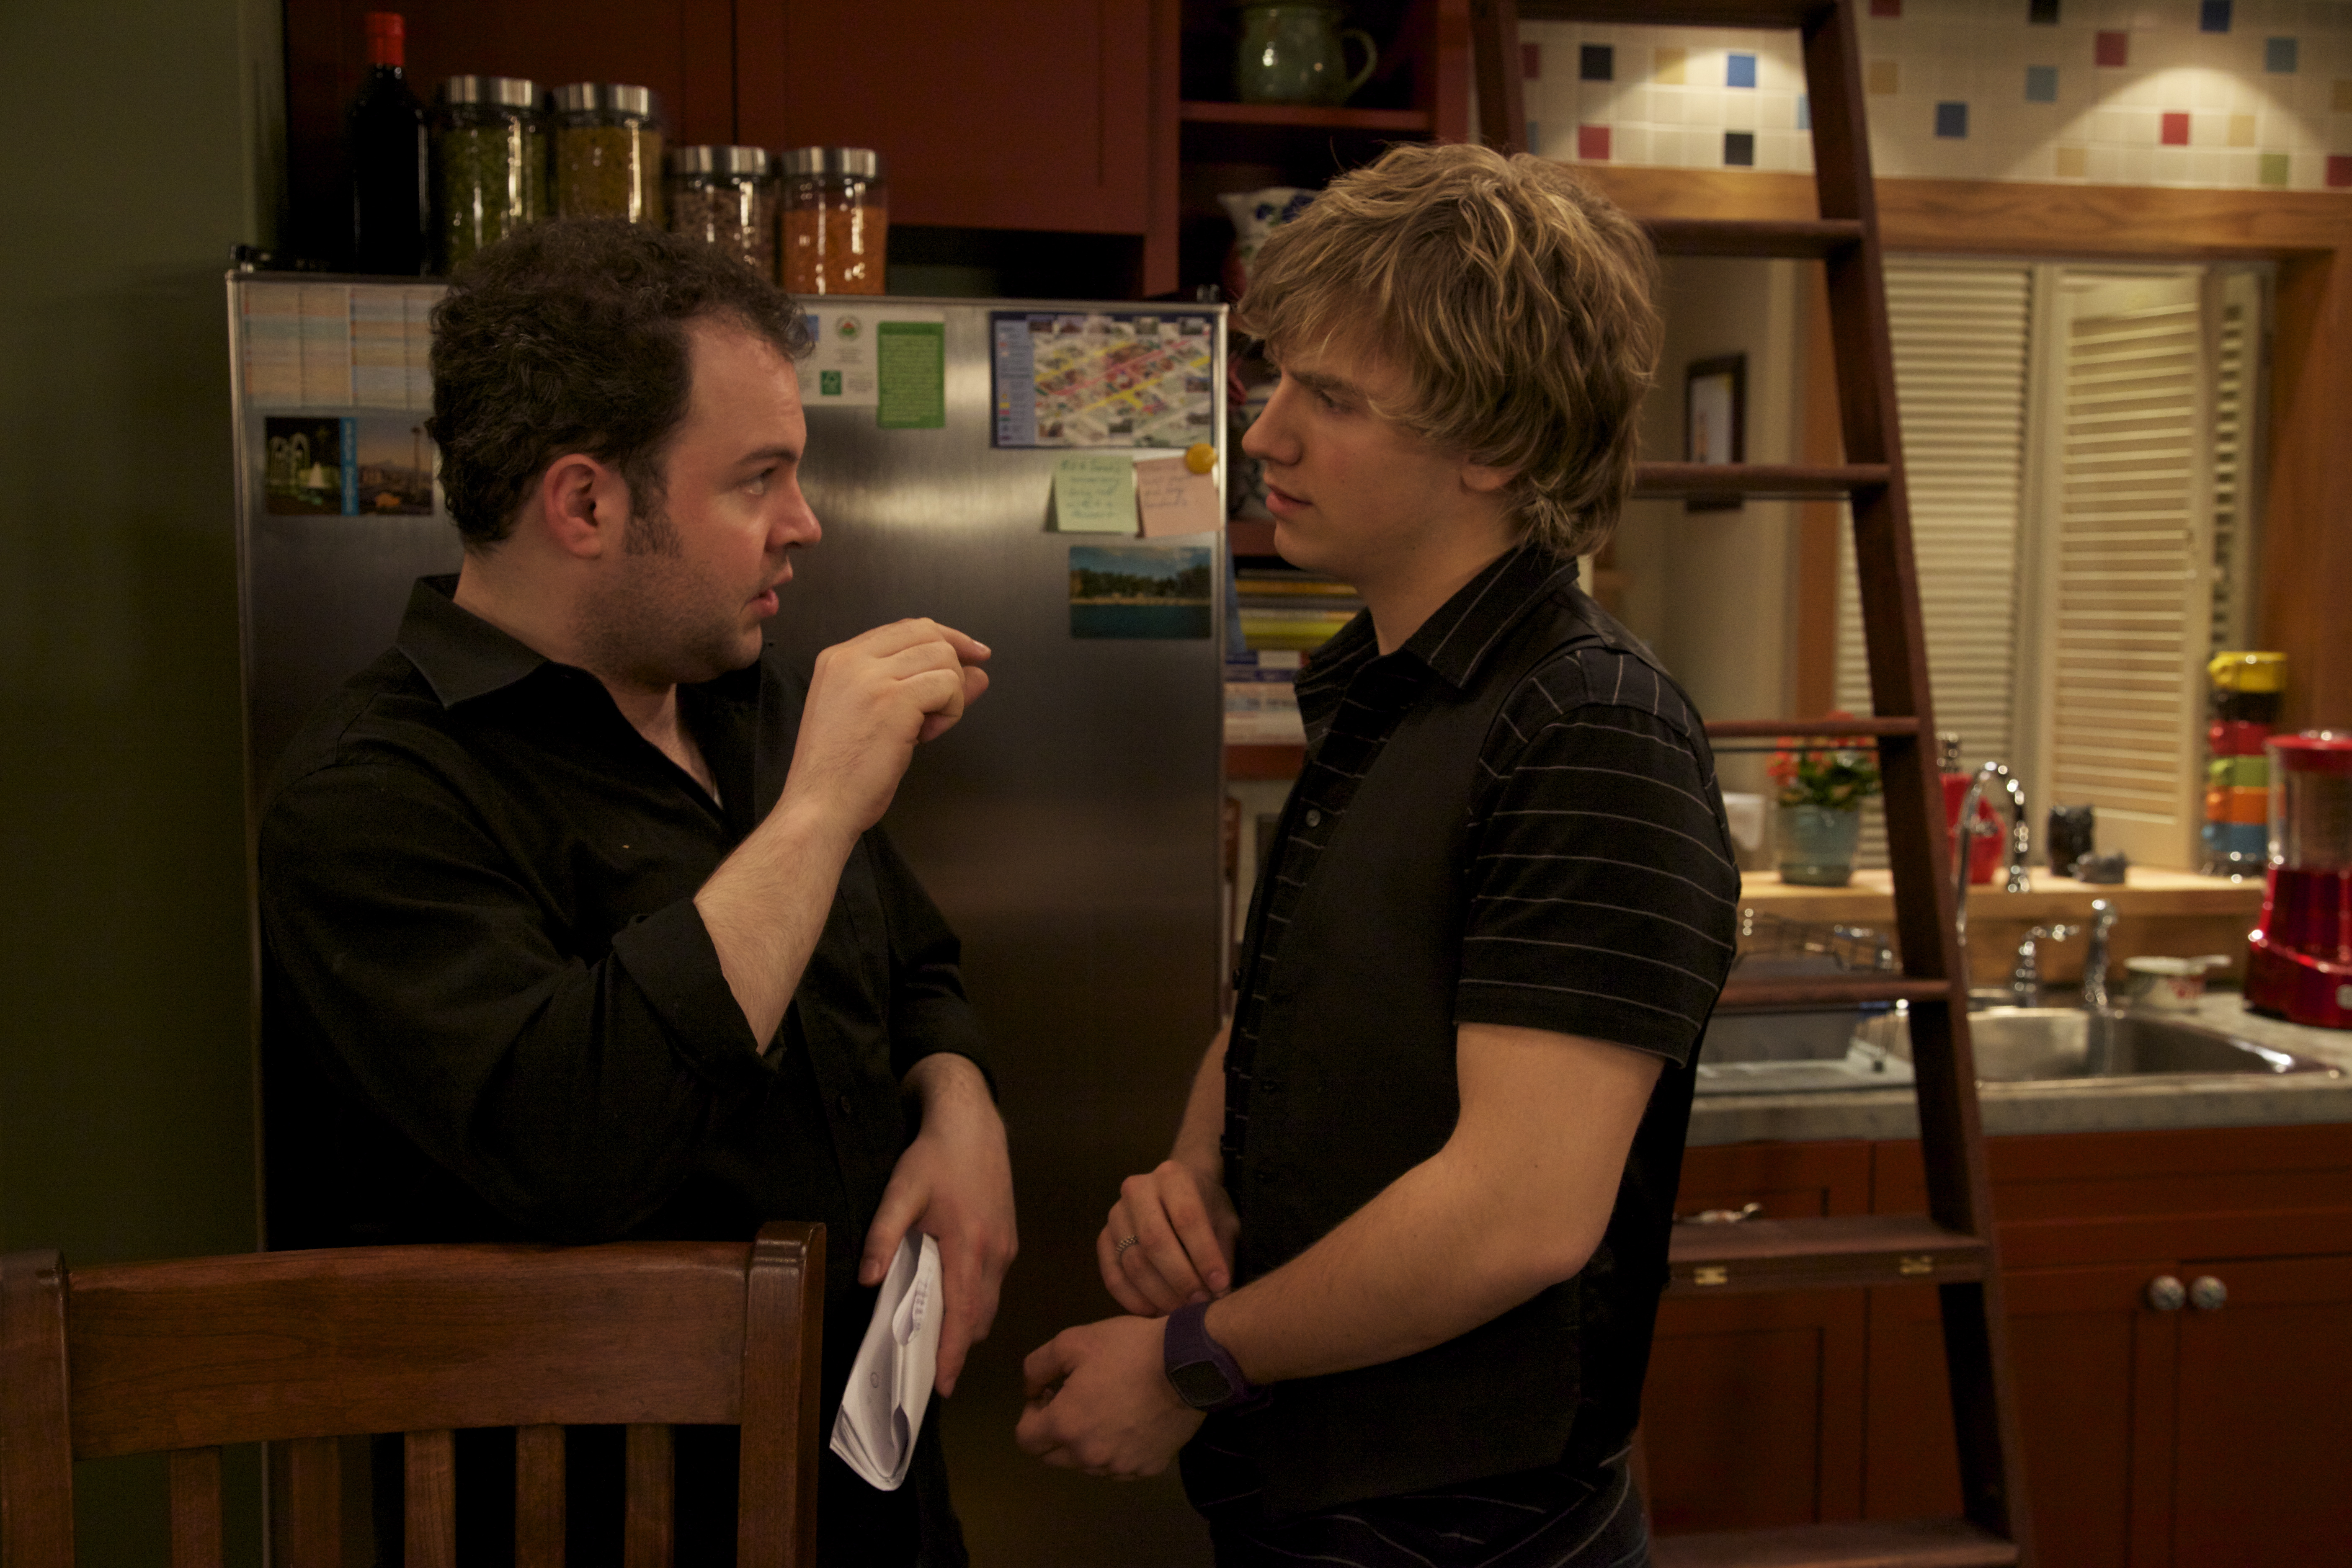 Coaching Nathan Mcleod (Gabe) on the set of Life With Boys.